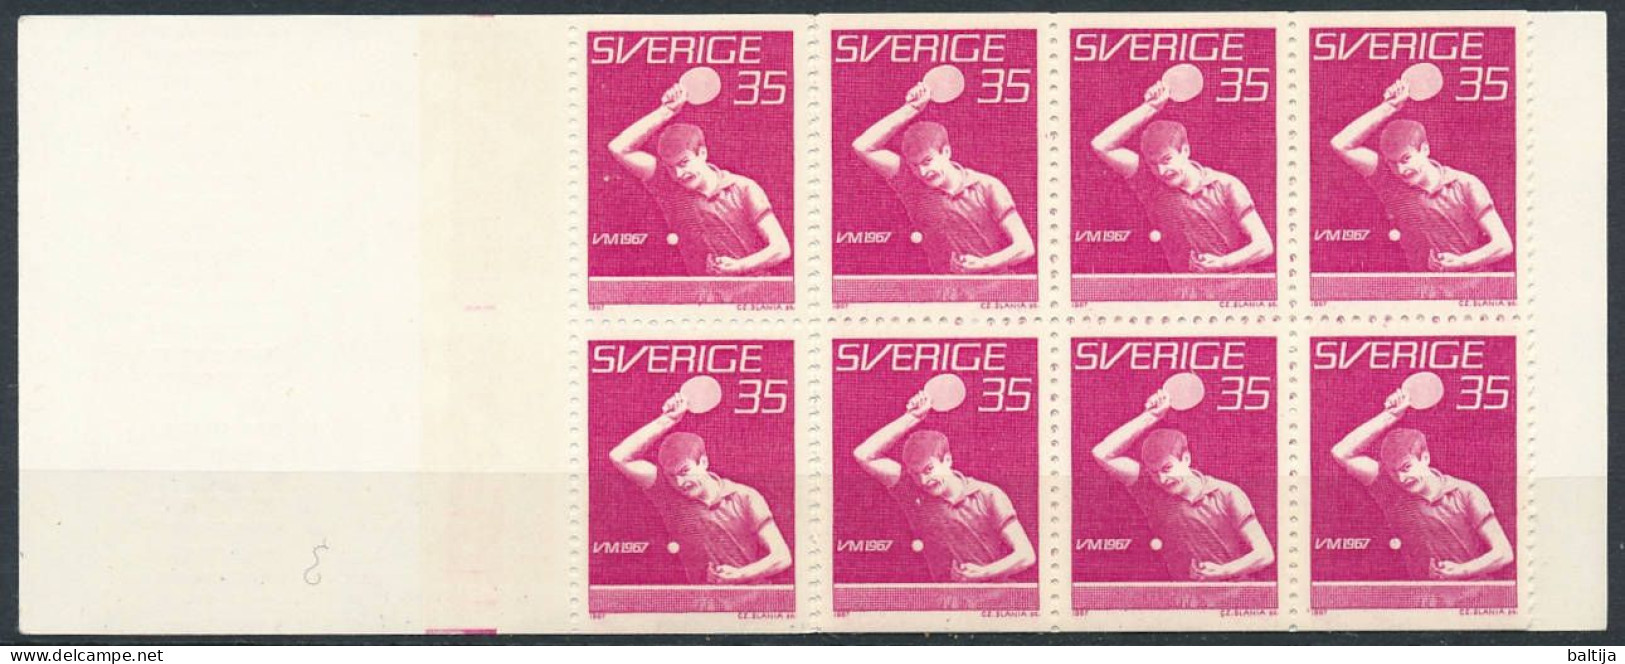 H.189 Booklet ** MNH / 1967 World Championships Table Tennis, Ping Pong - Tennis De Table